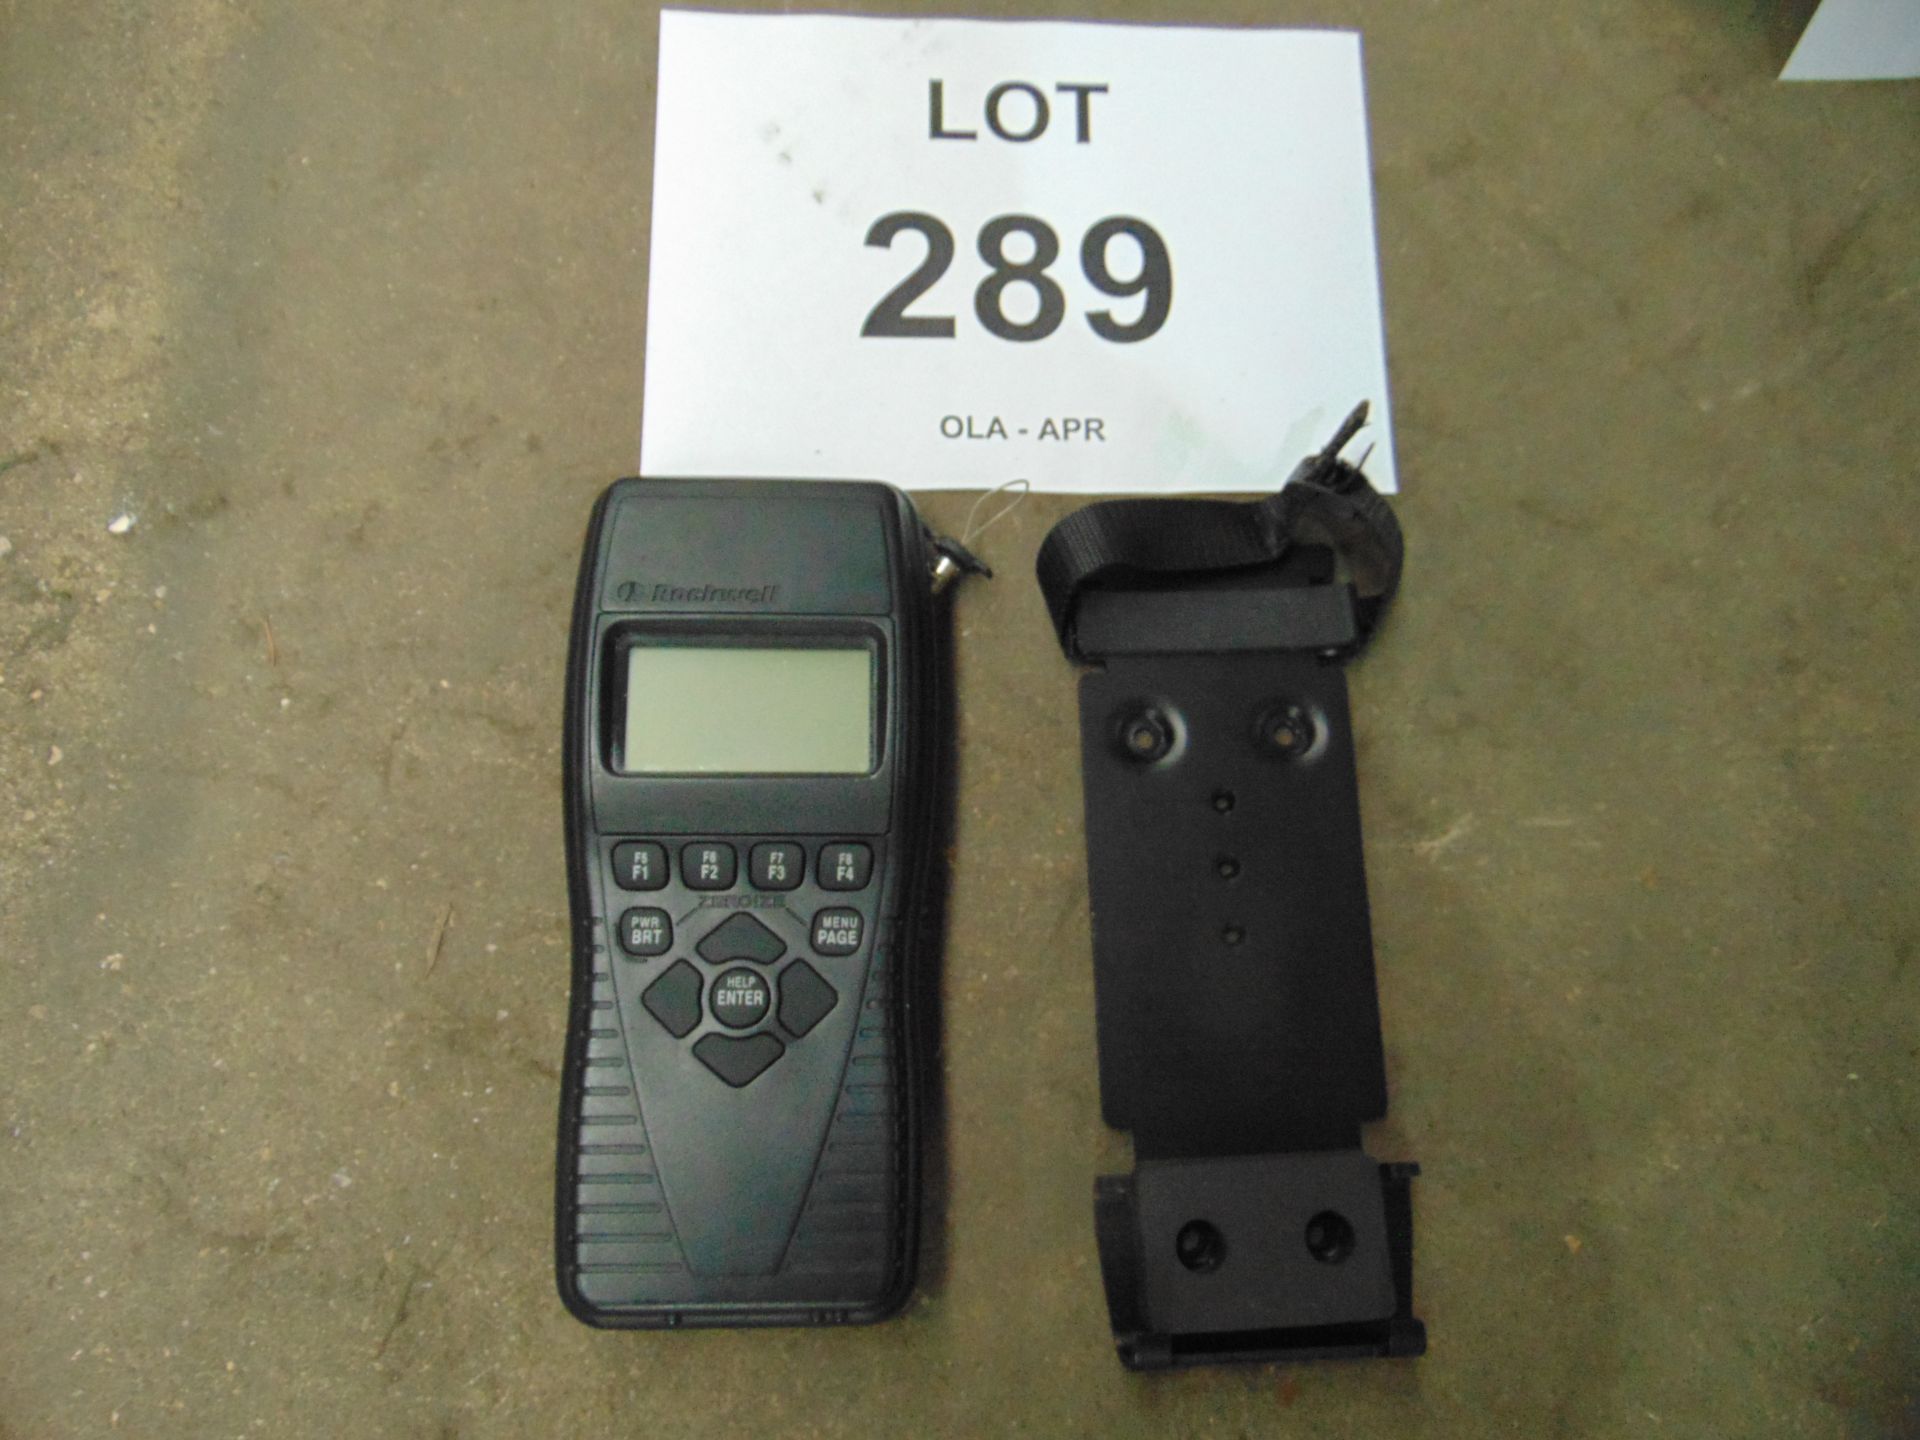 ROCKWELL HNV 2000 GPS RECIEVER C/W VEHICLE MOUNT AS SHOWN